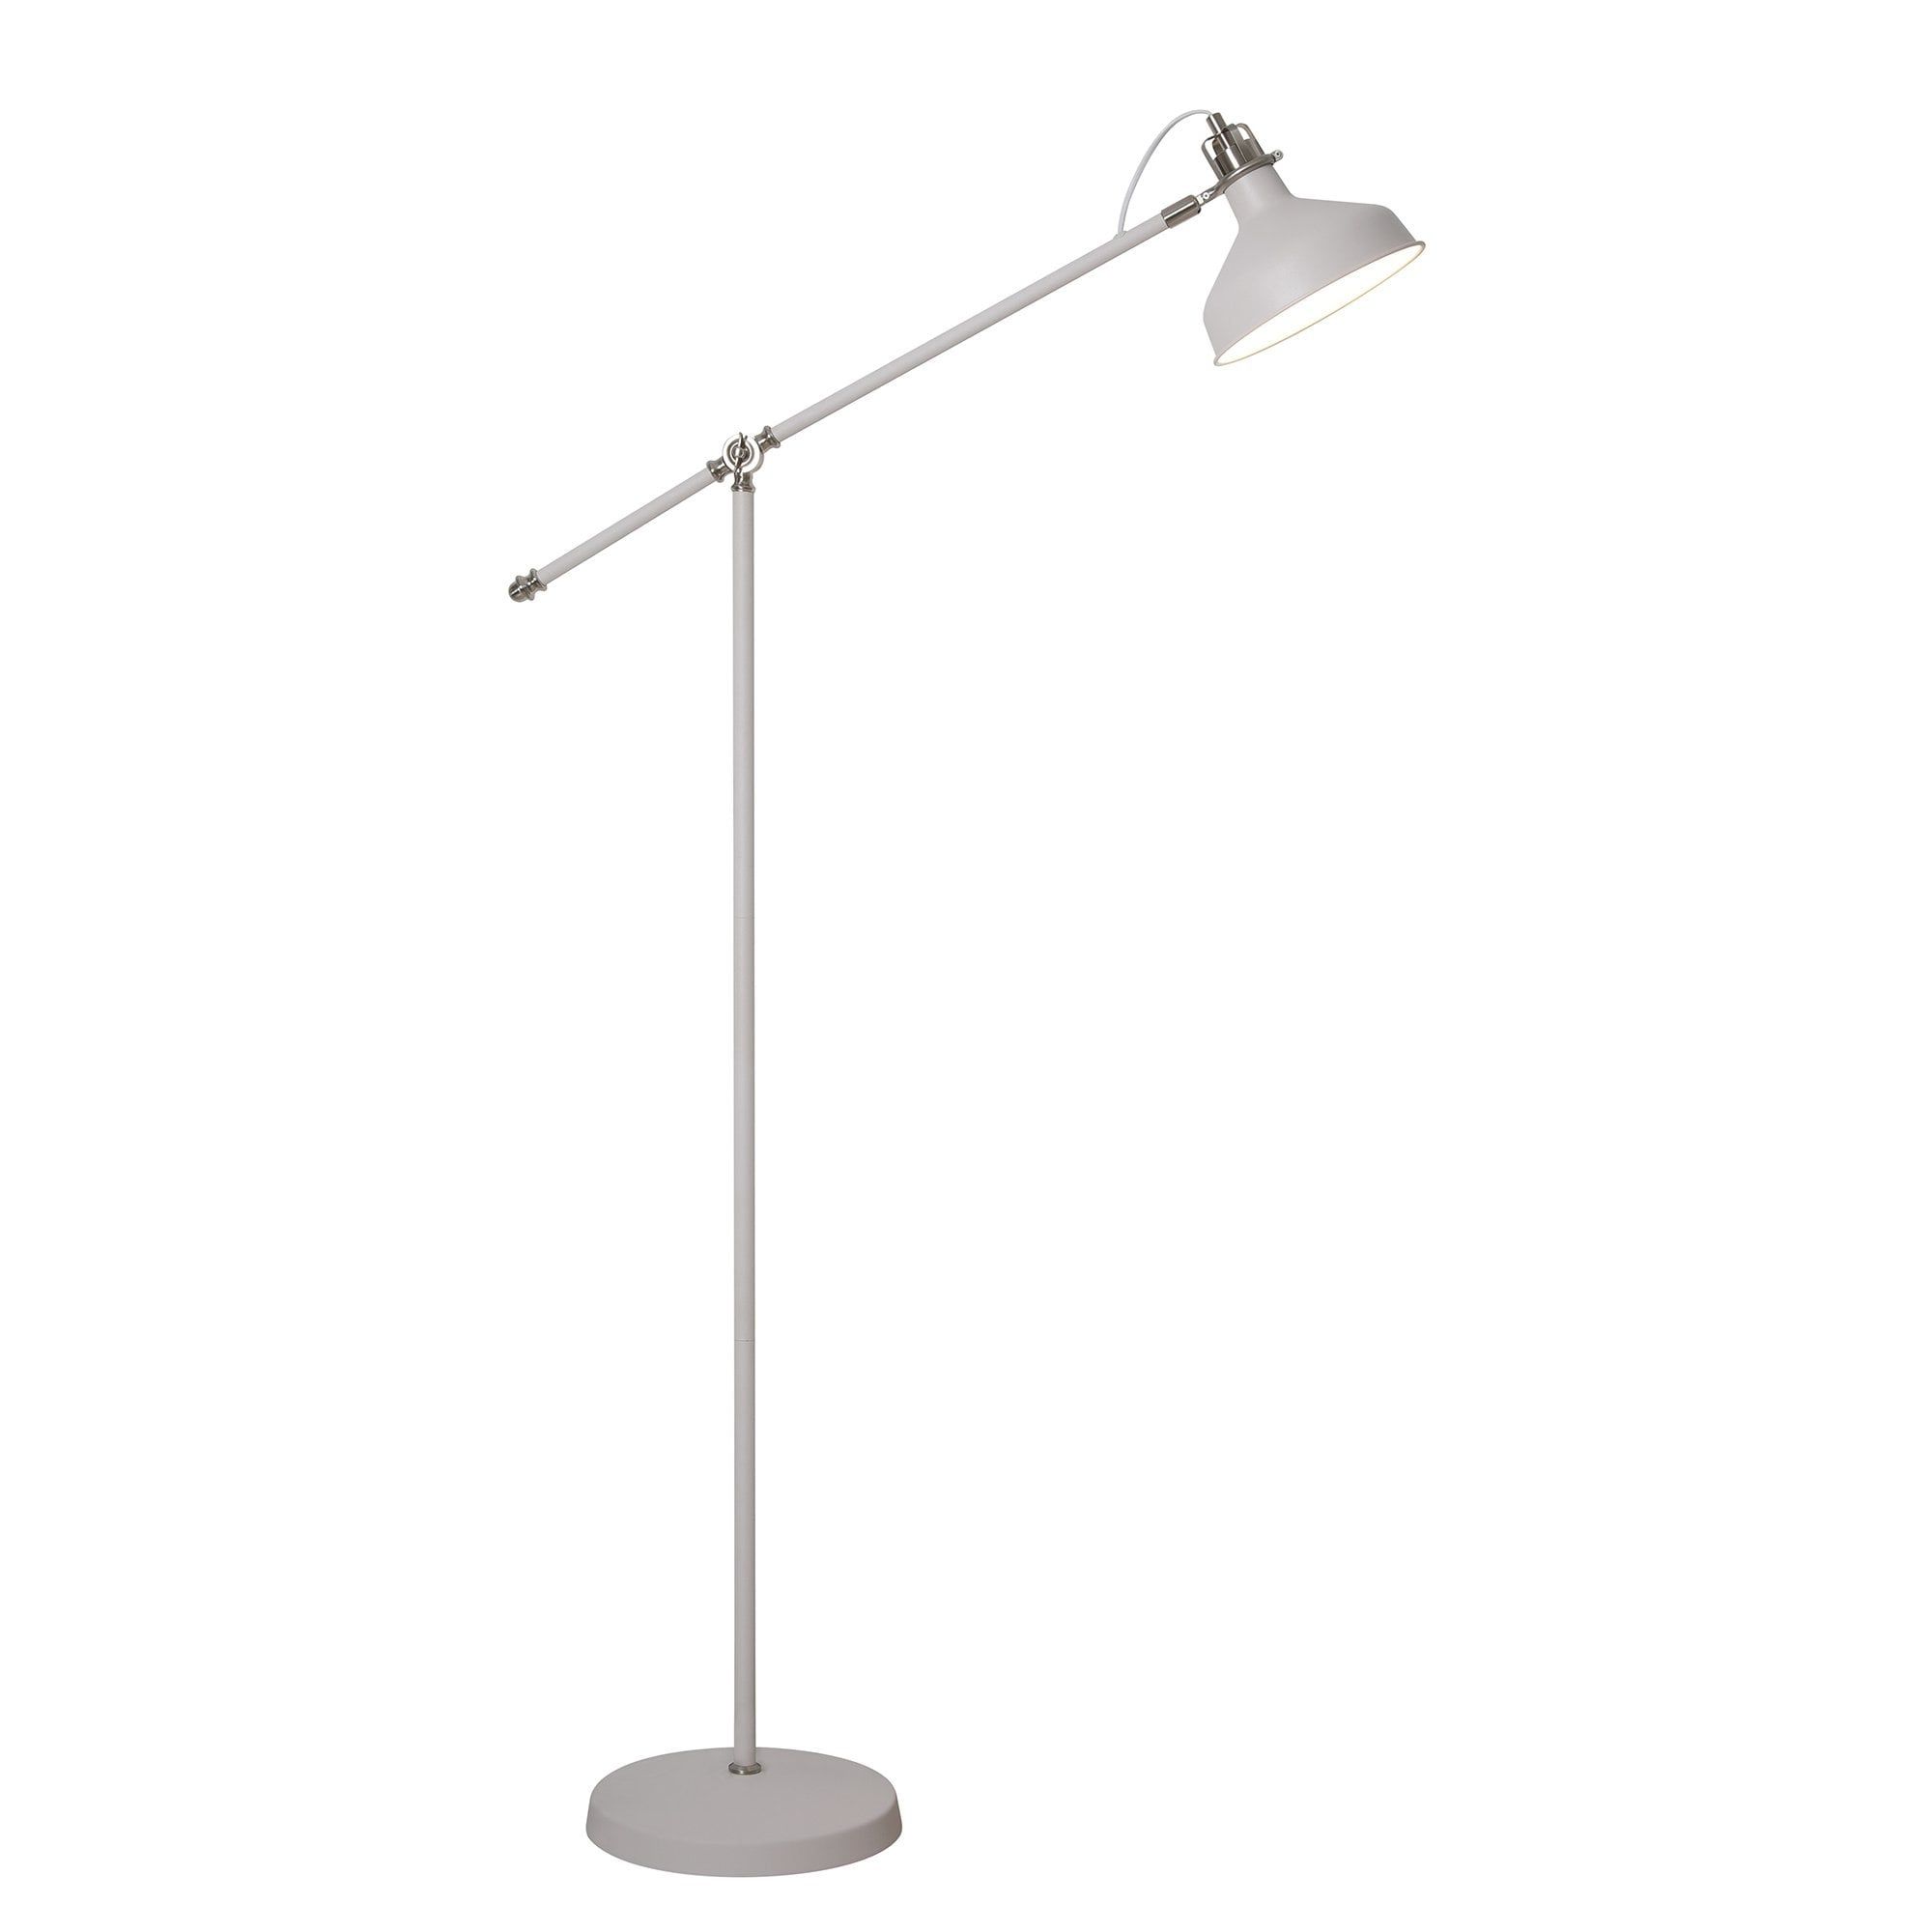 Widely Used Retro Style Angled White Floor Standing Lamp With Chrome Highlights Regarding Cantilever Standing Lamps (View 12 of 15)